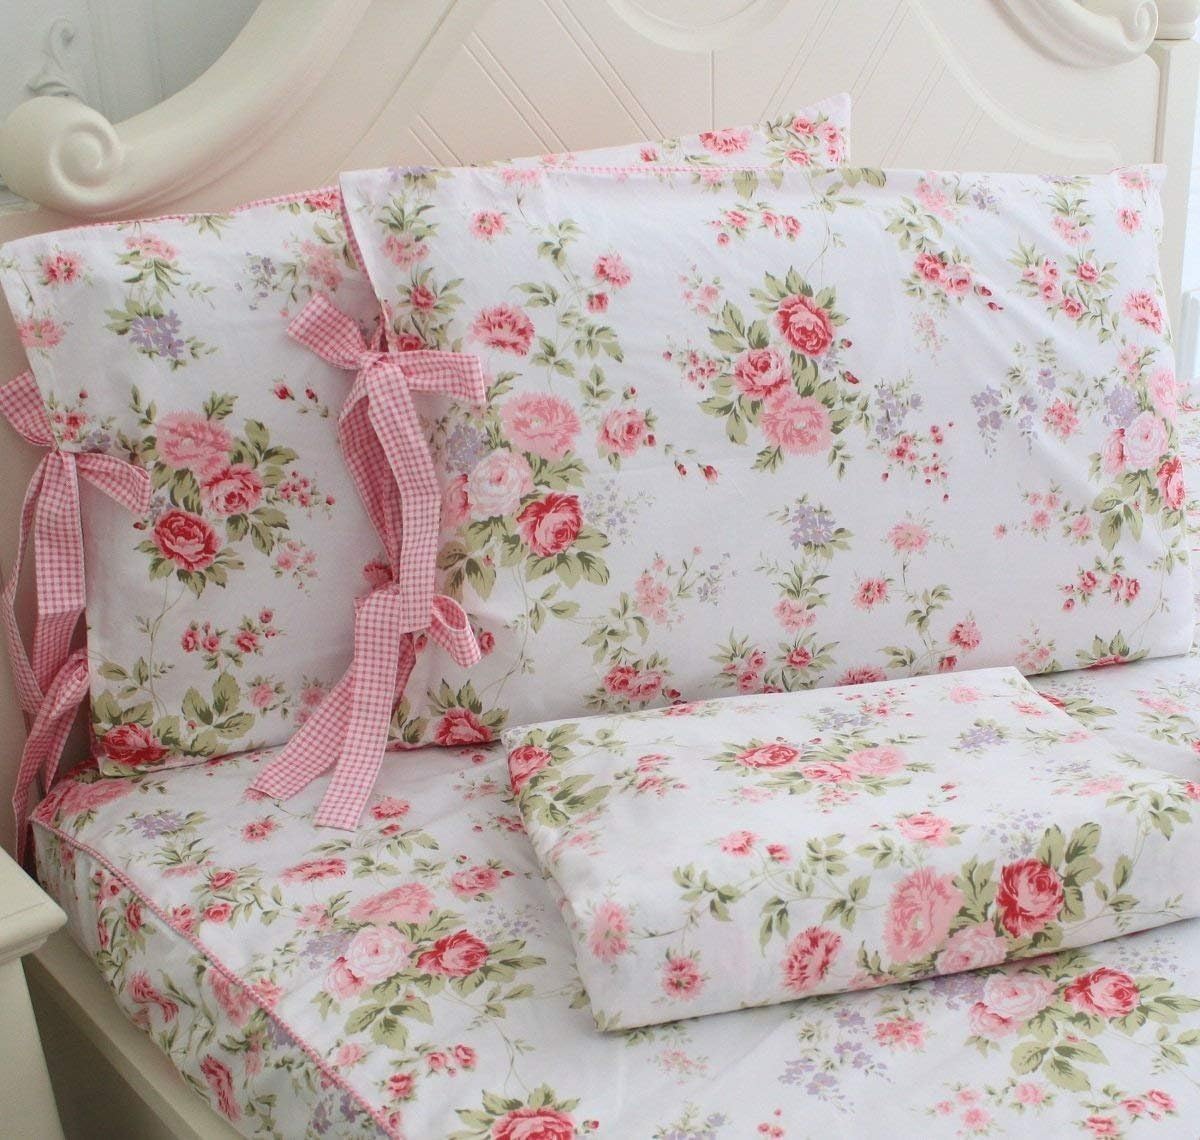 FADFAY Cotton Bed Sheets Set Rose Floral Bed Sheets 4-Piece Queen Size